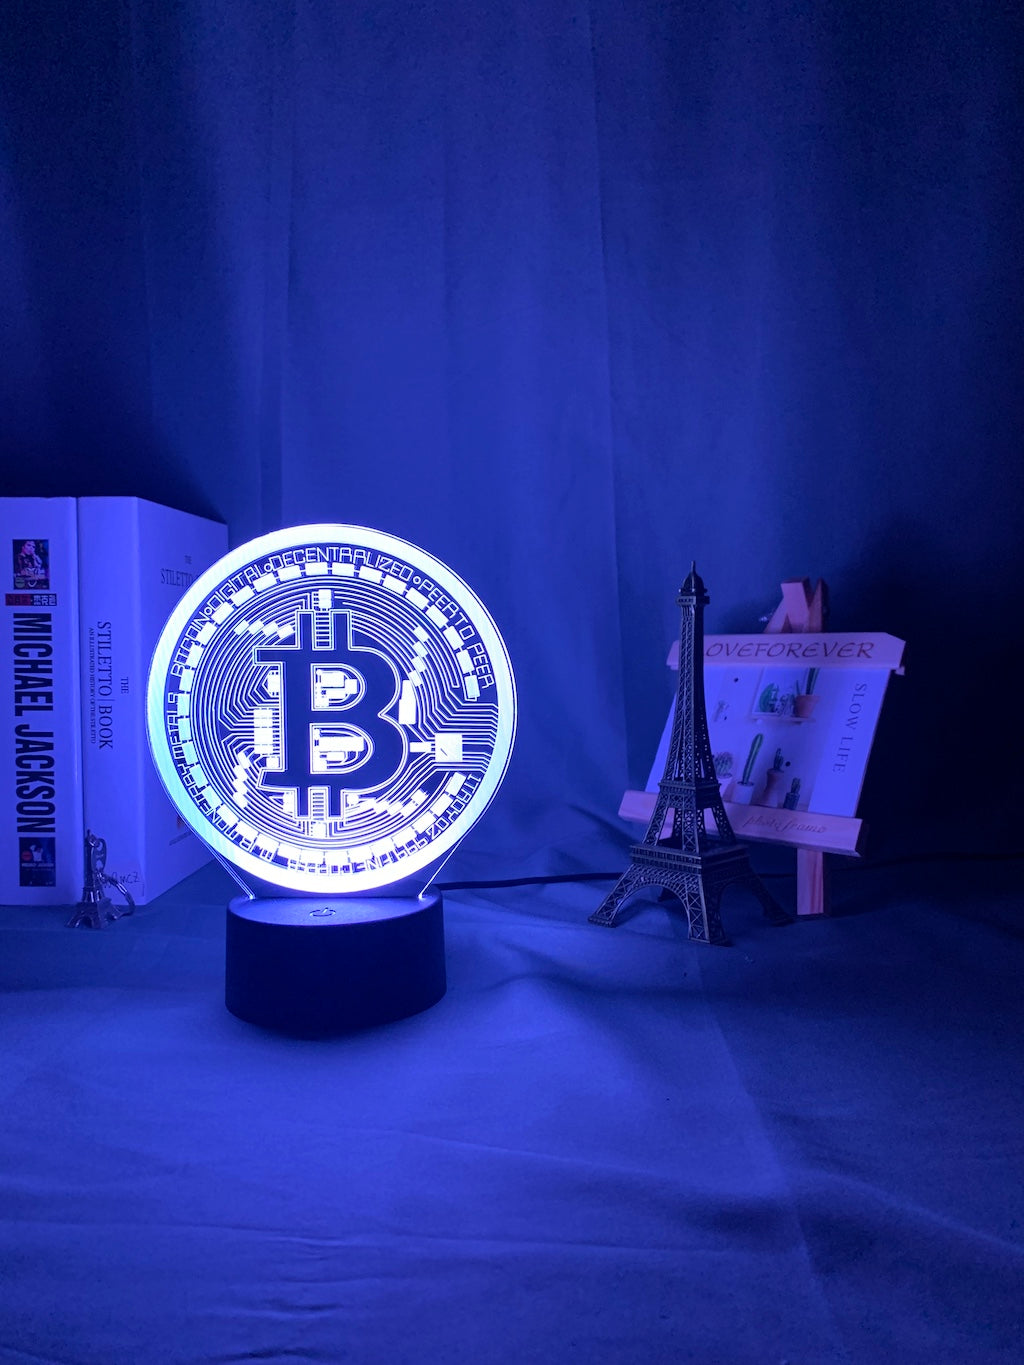 Acrylic Led Night Light Bitcoin for Room Decorative Nightlight Touch Sensor 7 Color Changing Battery Powered Table Night Lamp 3d